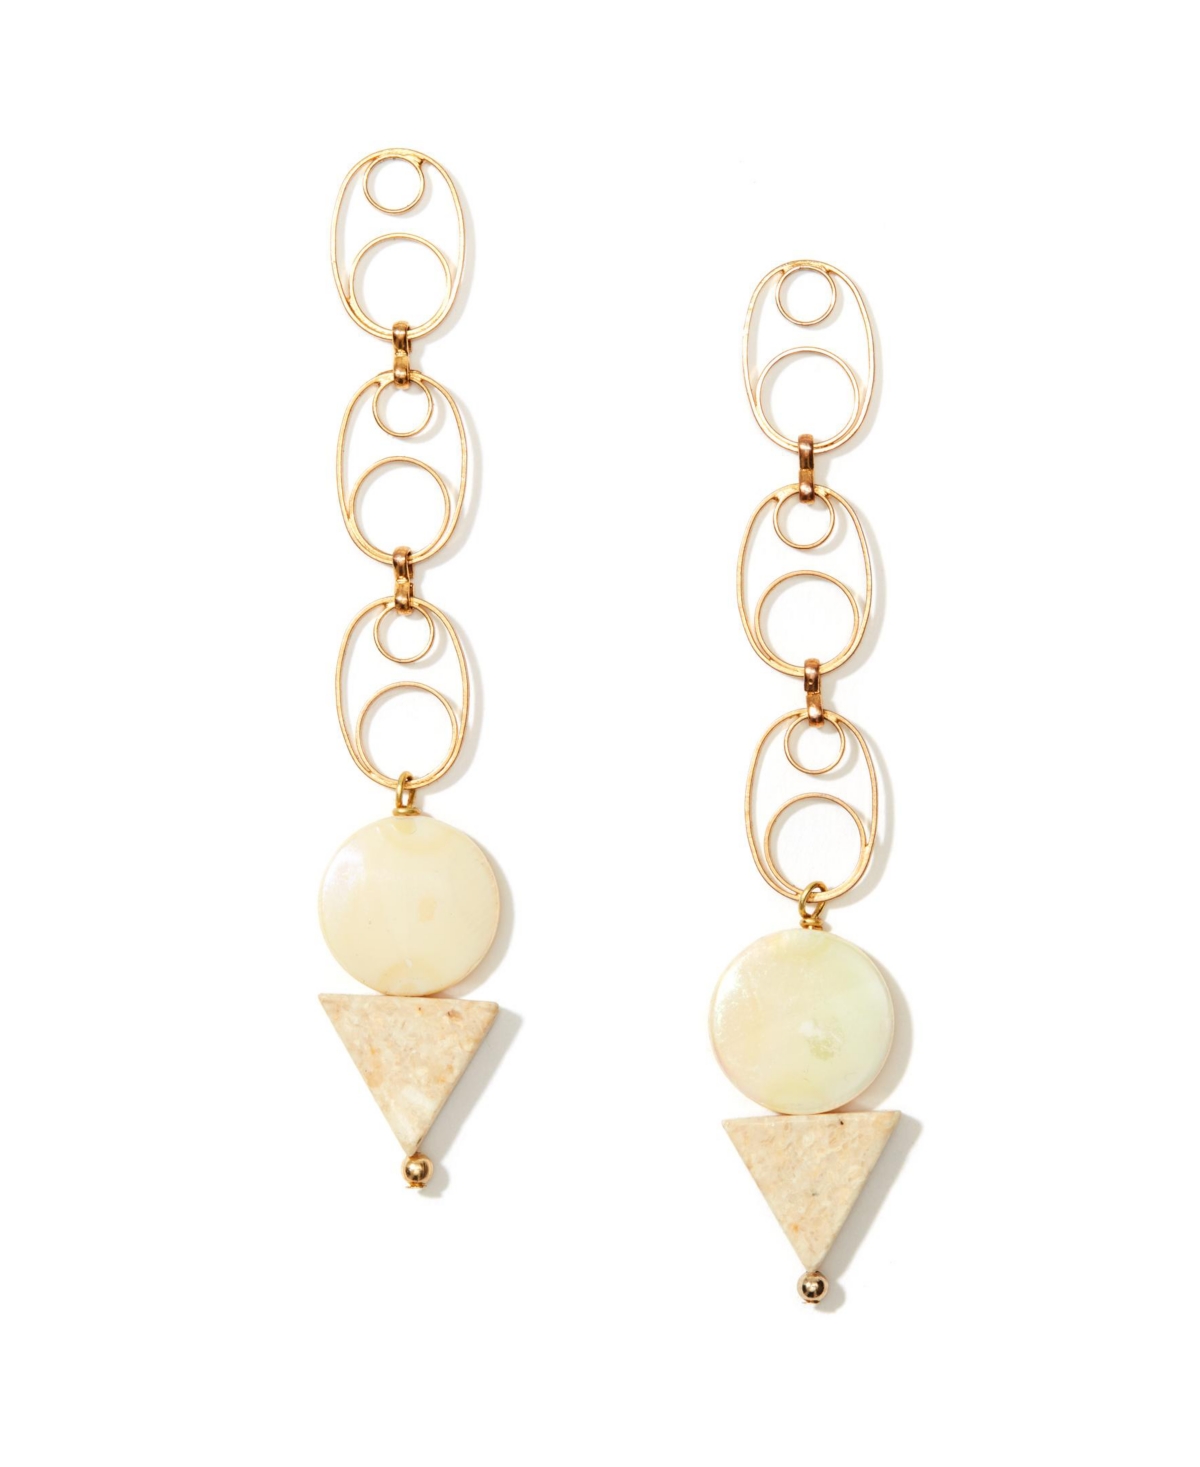 Nectar Nectar New York Minimal Whirlpool Drop Earrings In Gold Plated